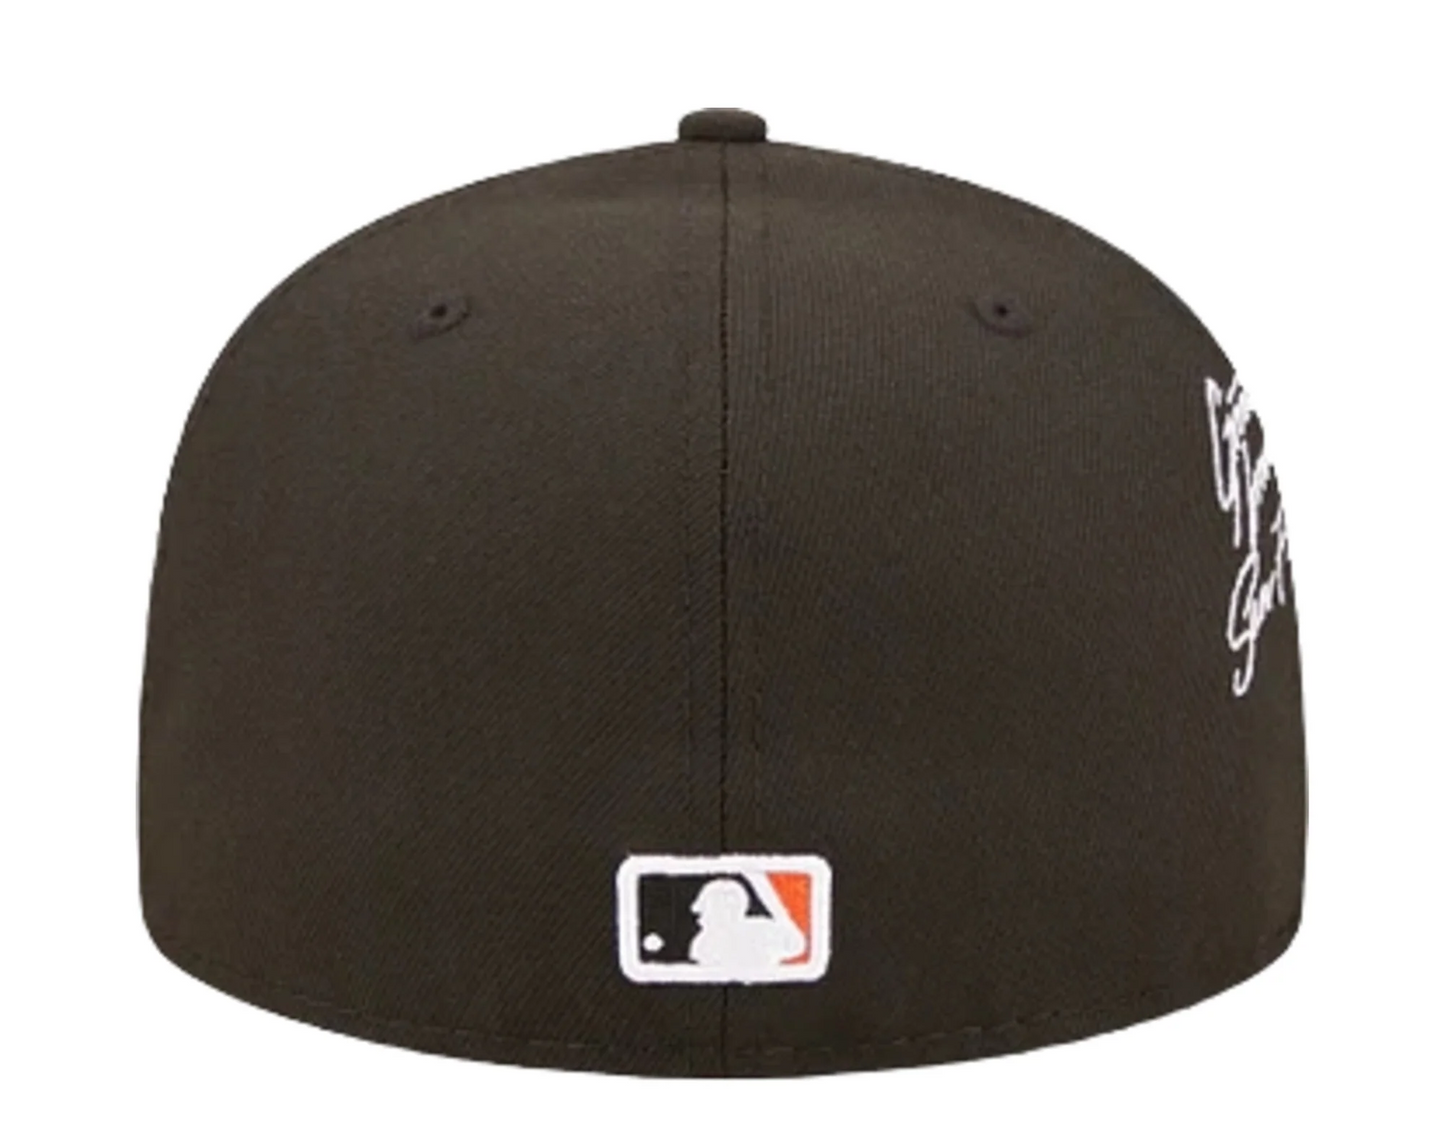 SAN FRANCISCO GIANTS CLOUD ICON 59FIFTY FITTED HAT